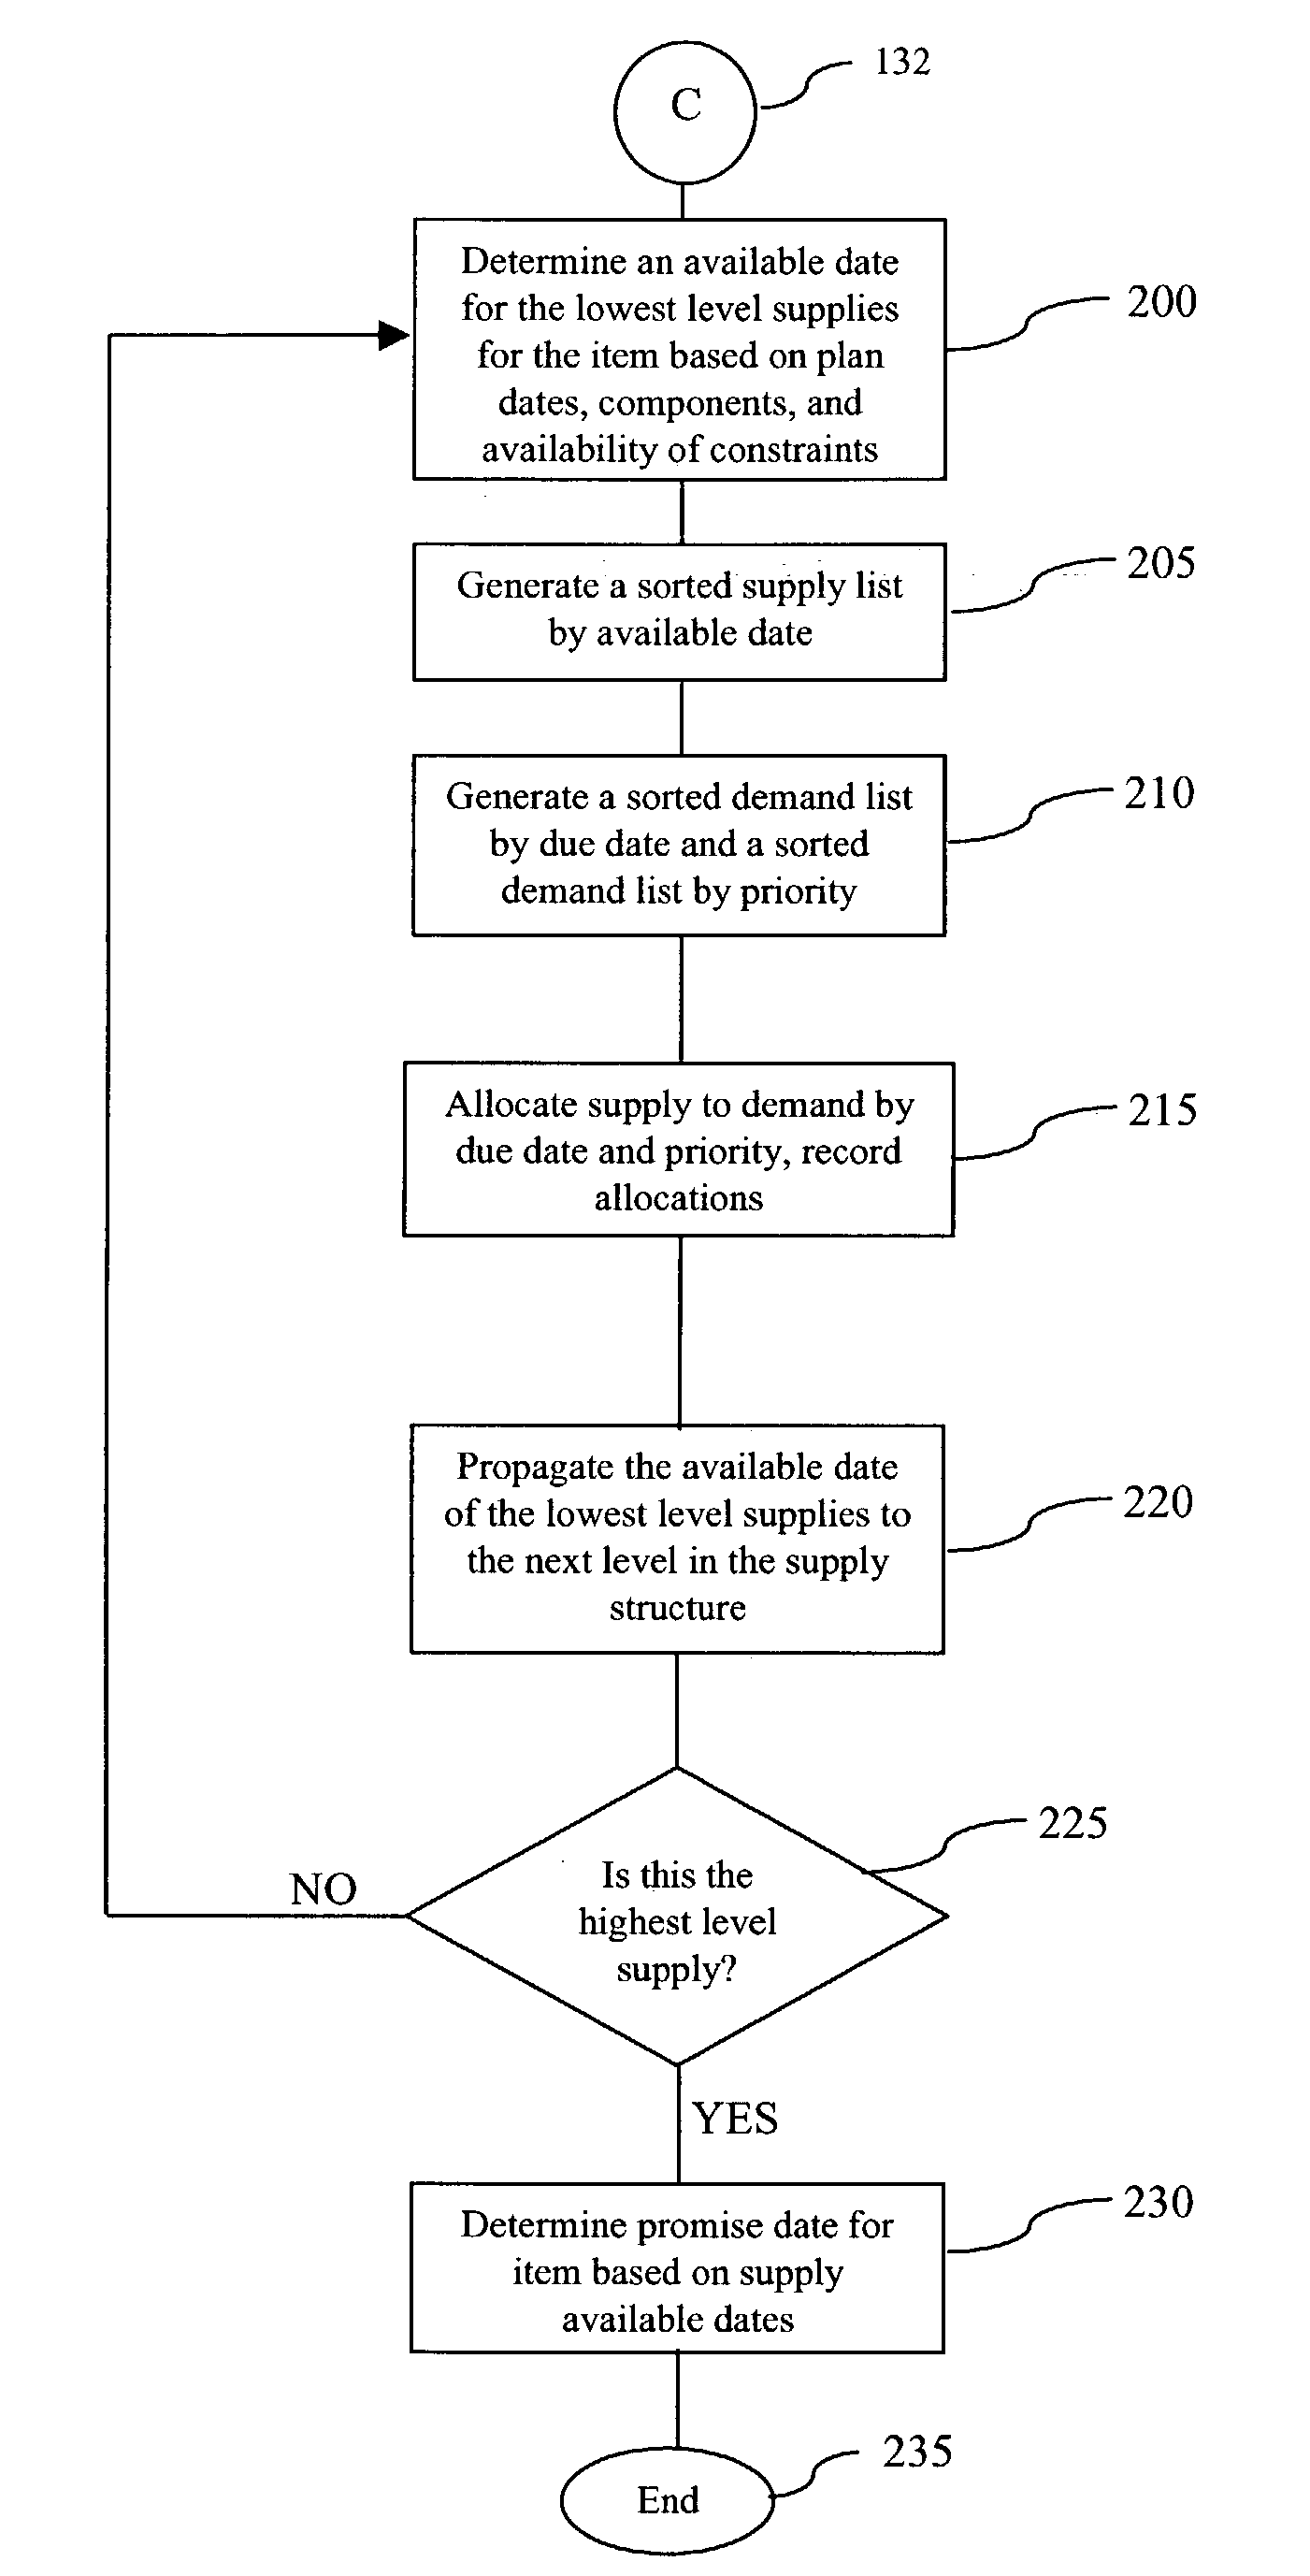 System and method for determining a demand promise date based on a supply available date